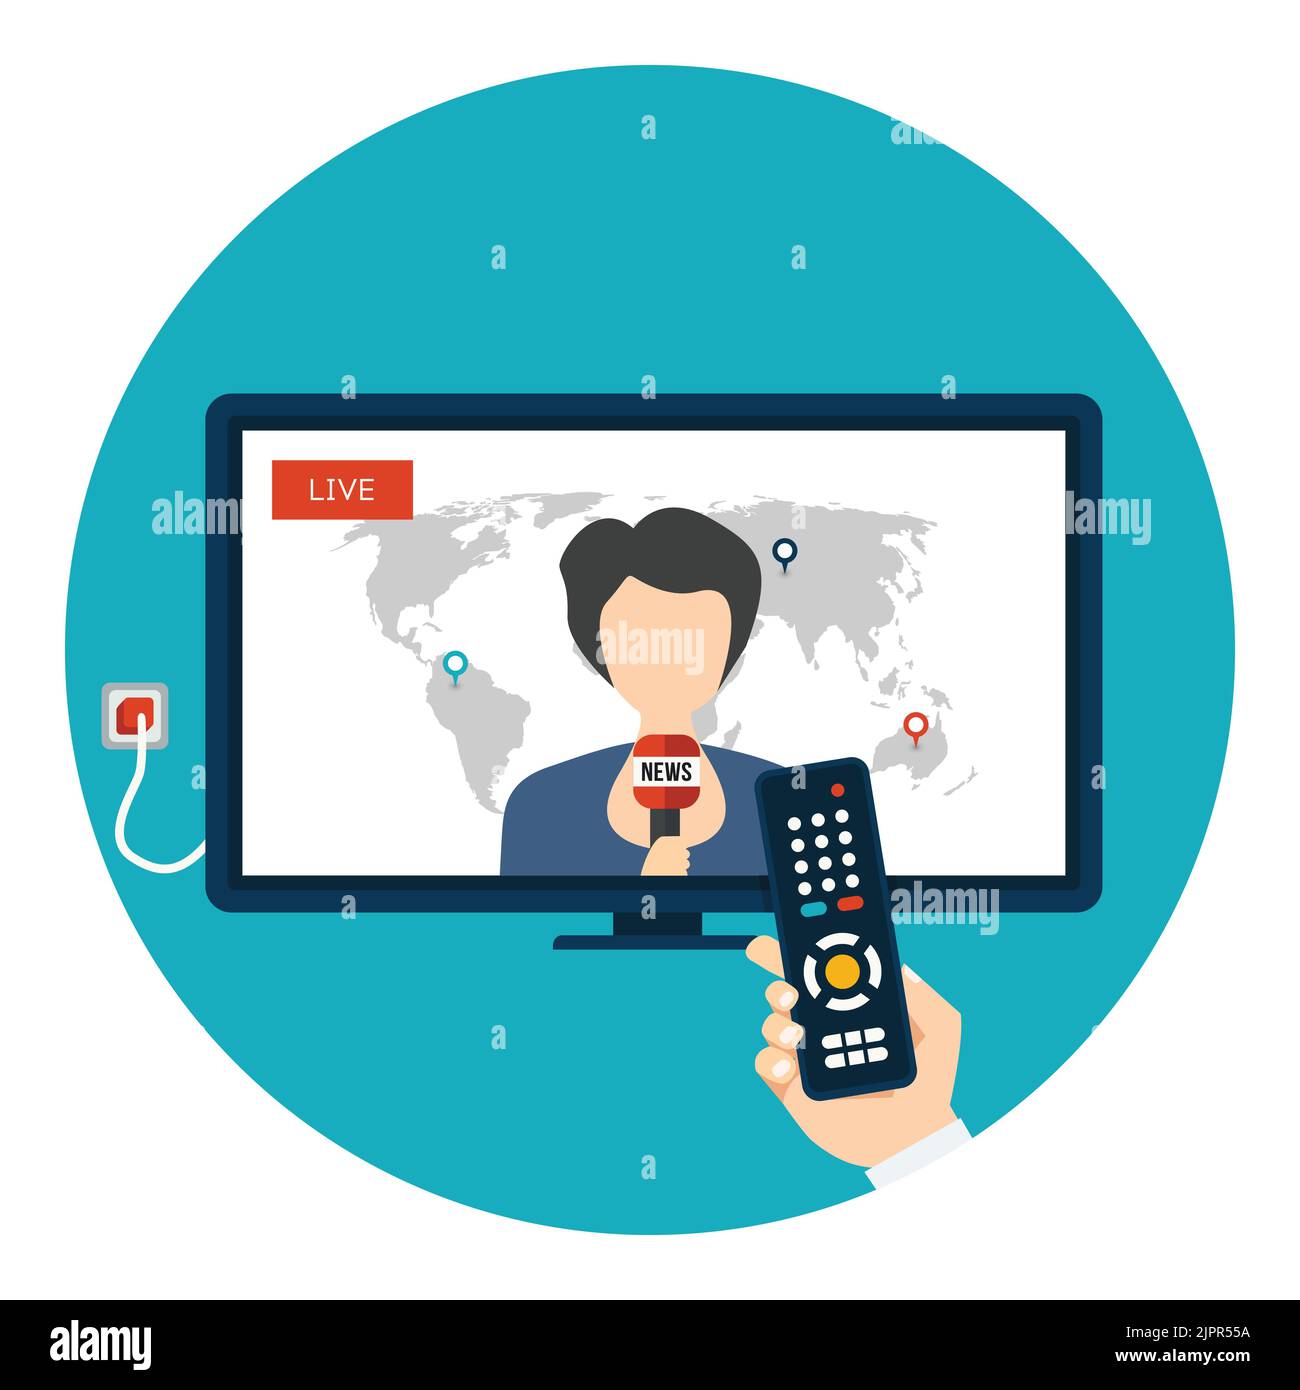 Live news on TV with female newsreader. Hand holding remote control and watching breaking news on TV. Flat vector icon in circle Stock Vector